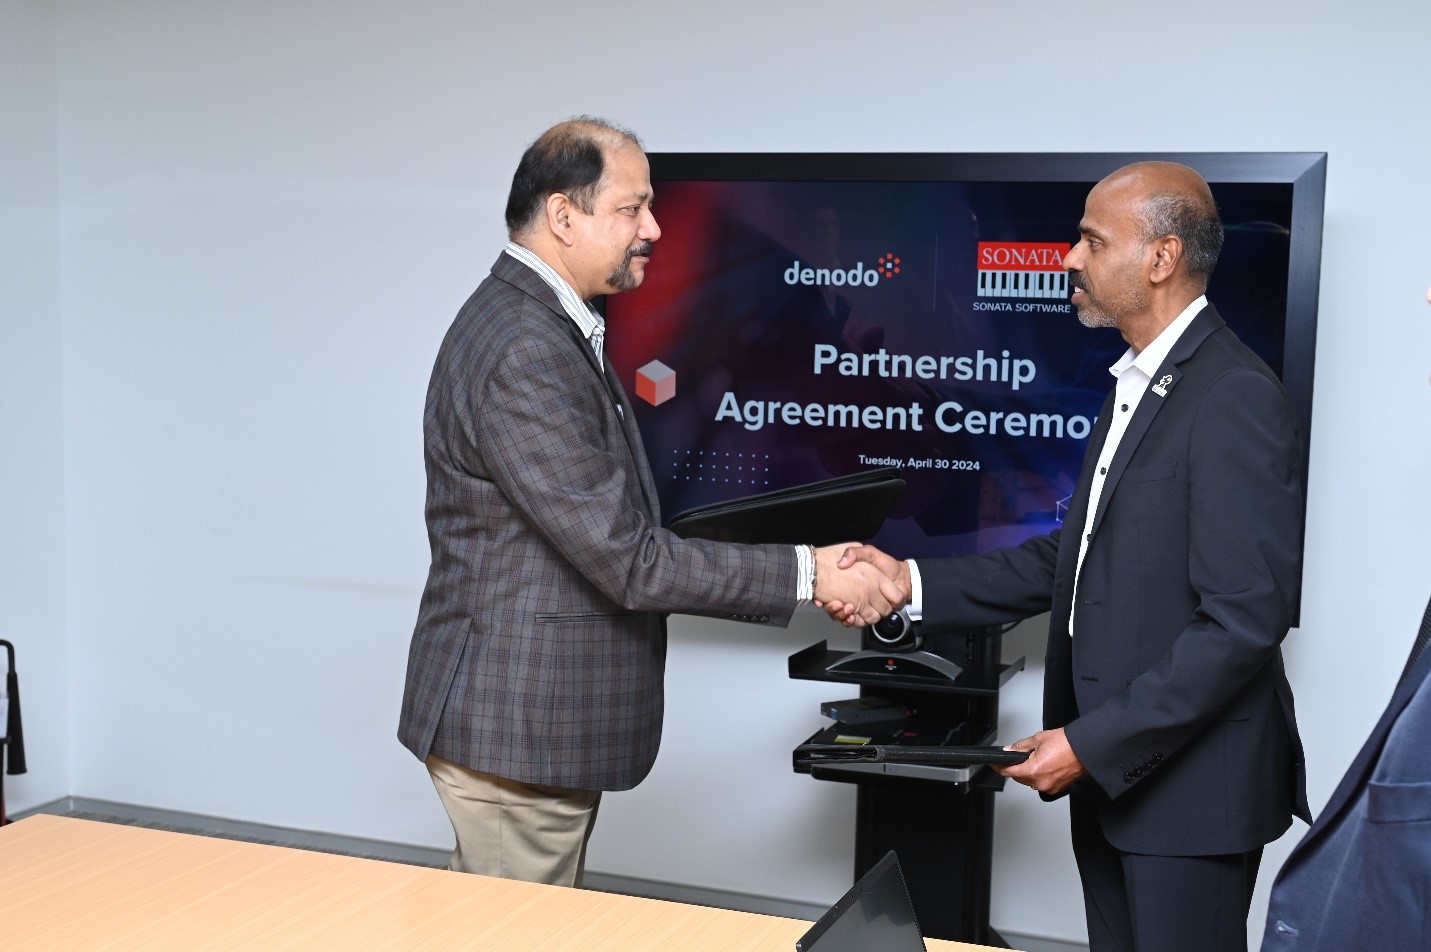 The Partnership Agreement Ceremony: Sujit Mohanty, Managing Director and Chief Executive Officer, SITL and Ravi Shankar, Senior Vice President and Chief Marketing Officer, Denodo